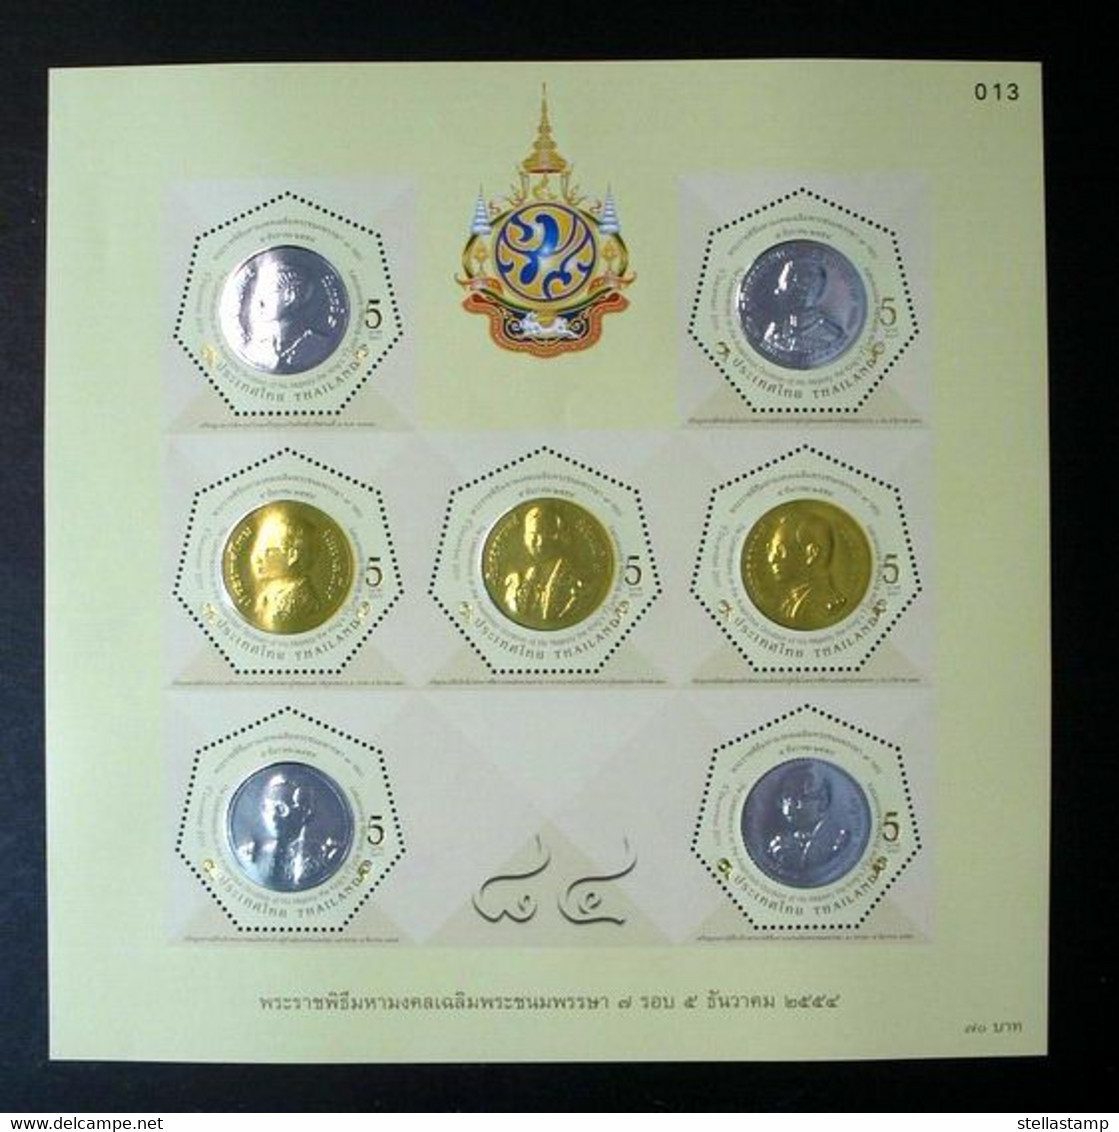 Thailand Stamp SS 2011 HM King 7th Cycle Birthday 1st Series - Thailand